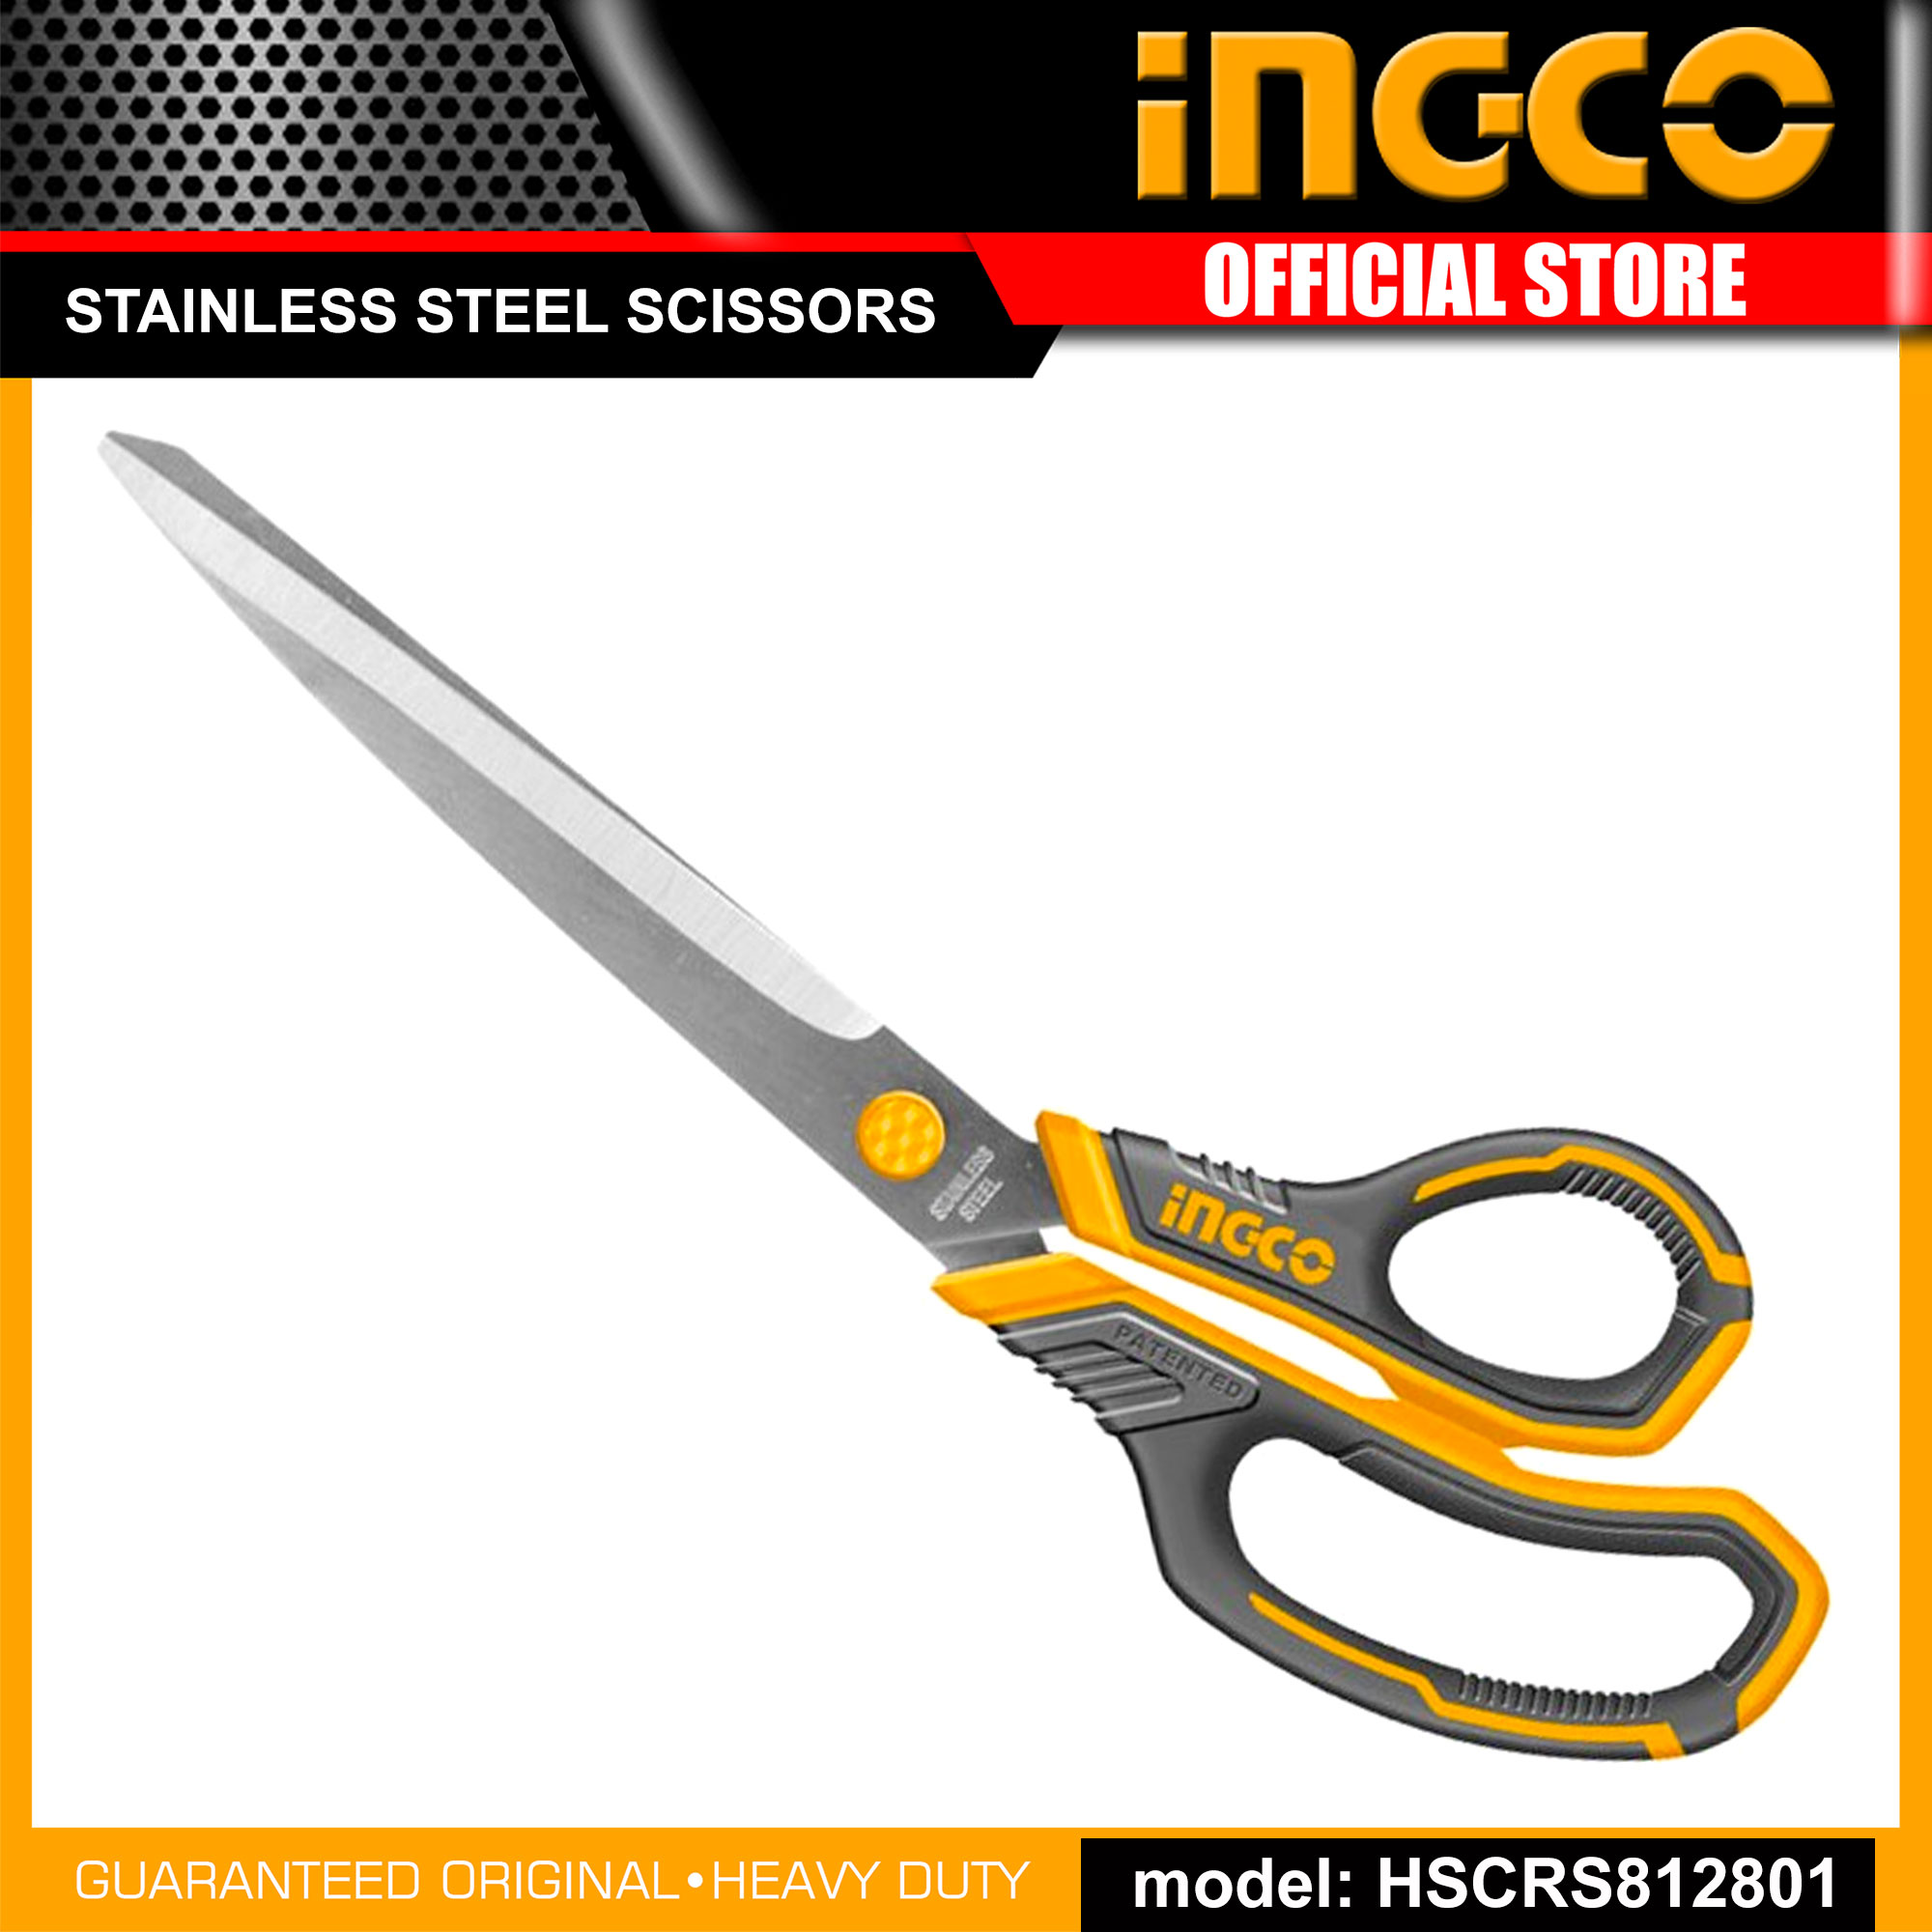 Tijera Electricista 145mm INGCO REF HES02855 – Hechi Tools